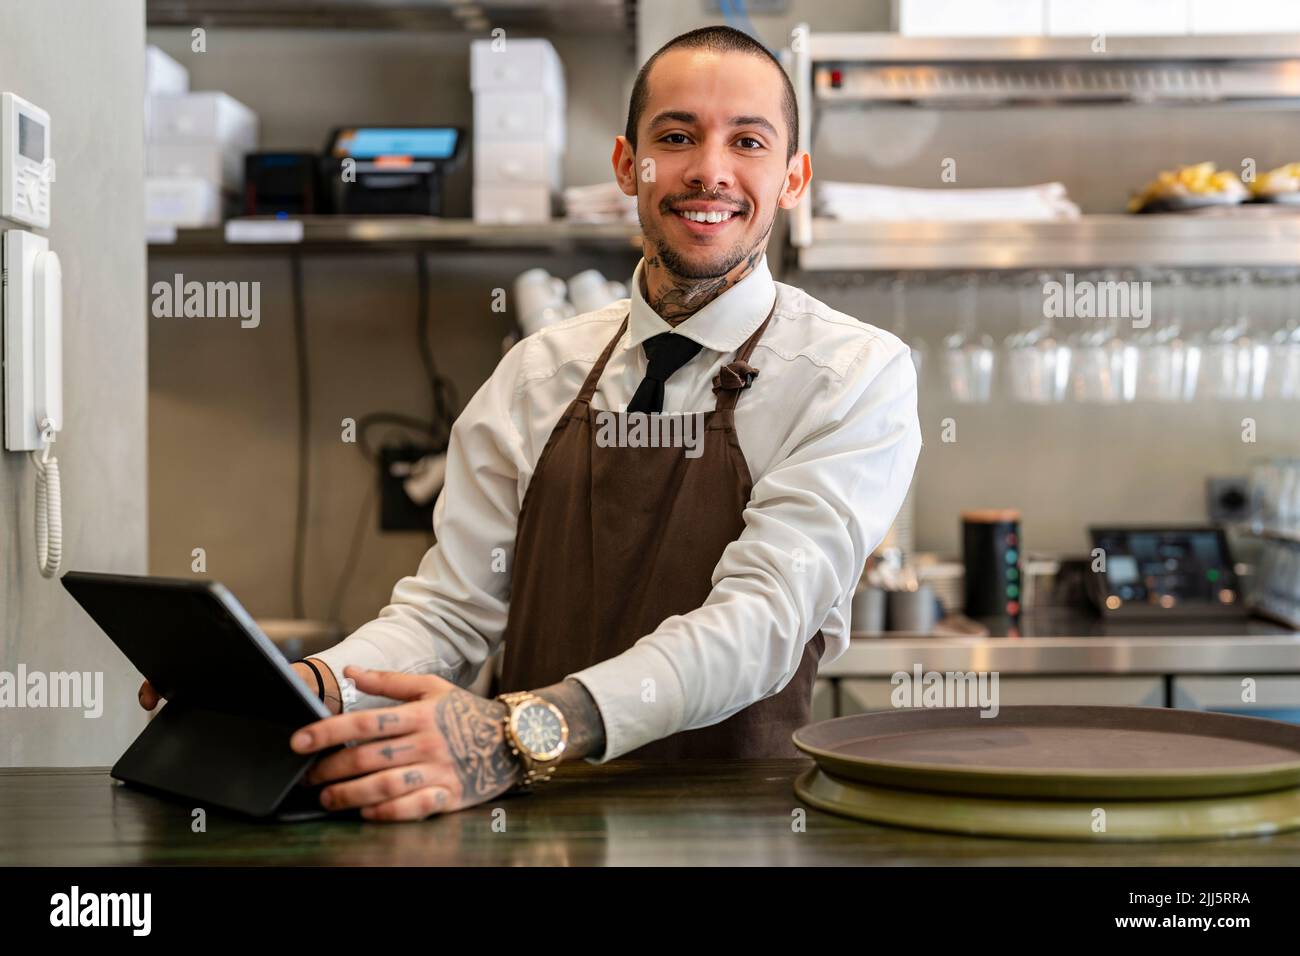 Smiling bartender with tablet PC standing at bar counter Stock Photo